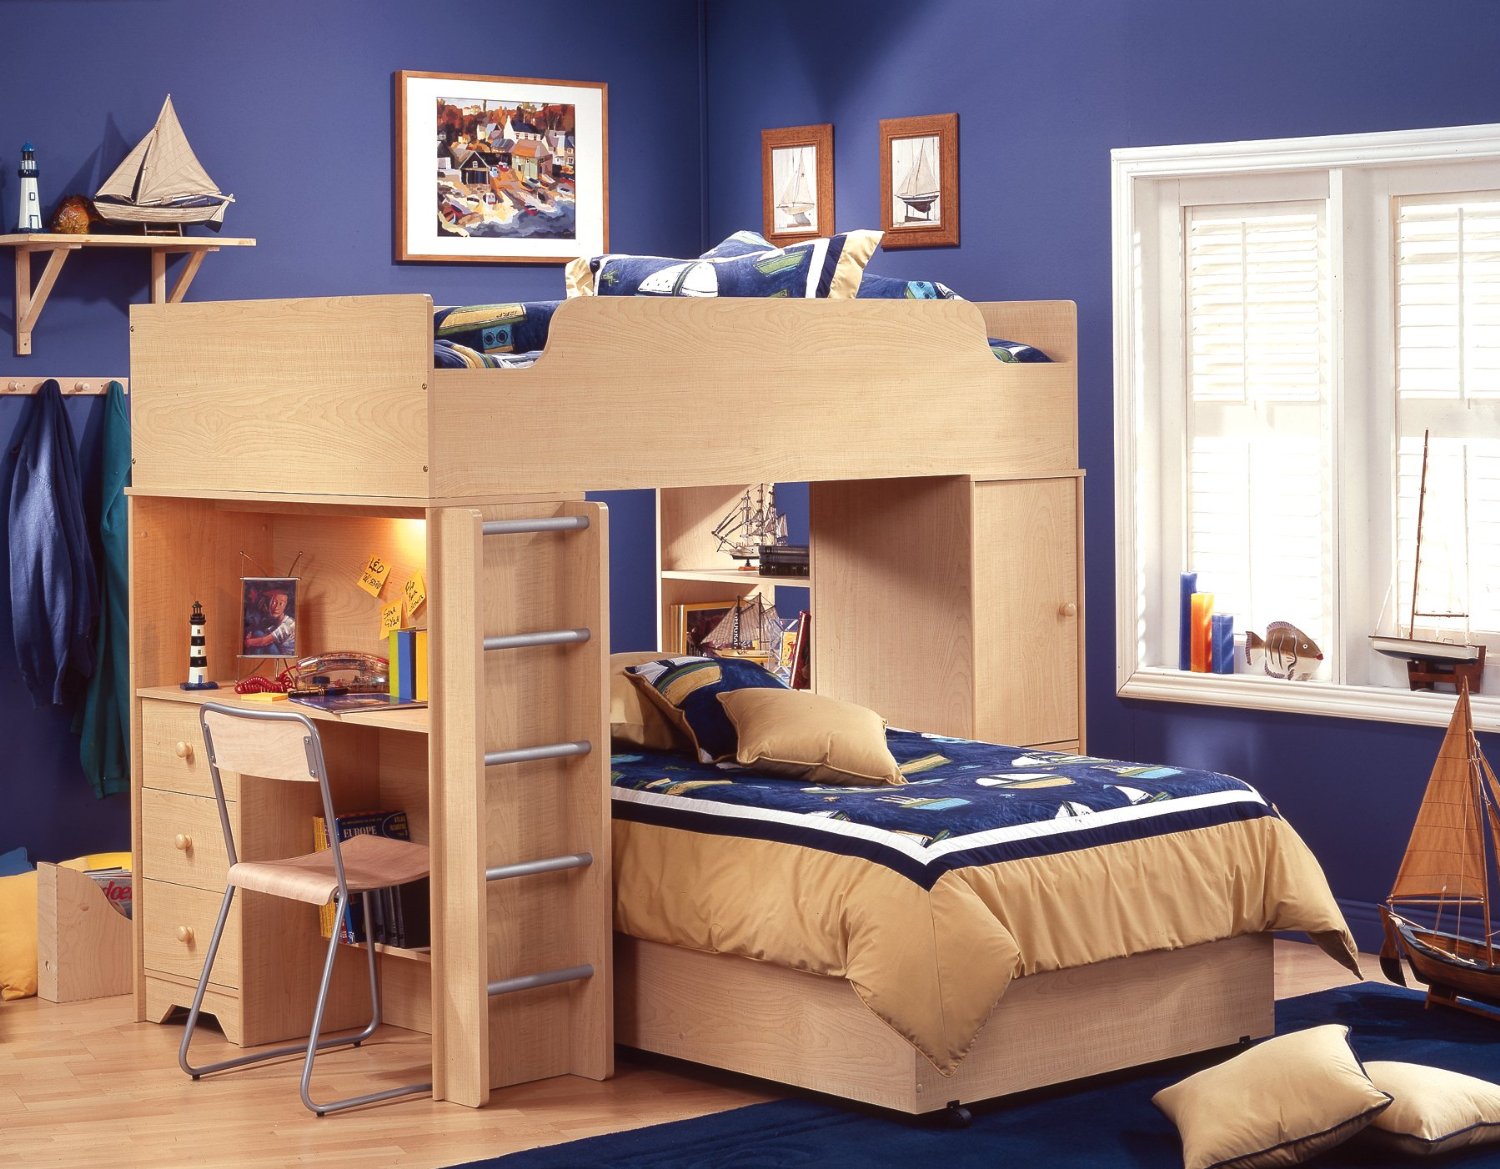 Wooden Furnitures Kids Extraordinary Wooden Furniture Of Cool Kids Rooms With Bunk Beds Combined With Desk Completed With Cabinet Lighting And Furnished With Wall Decorations Kids Room Desire Behind The Creation Of Cool Kids Rooms